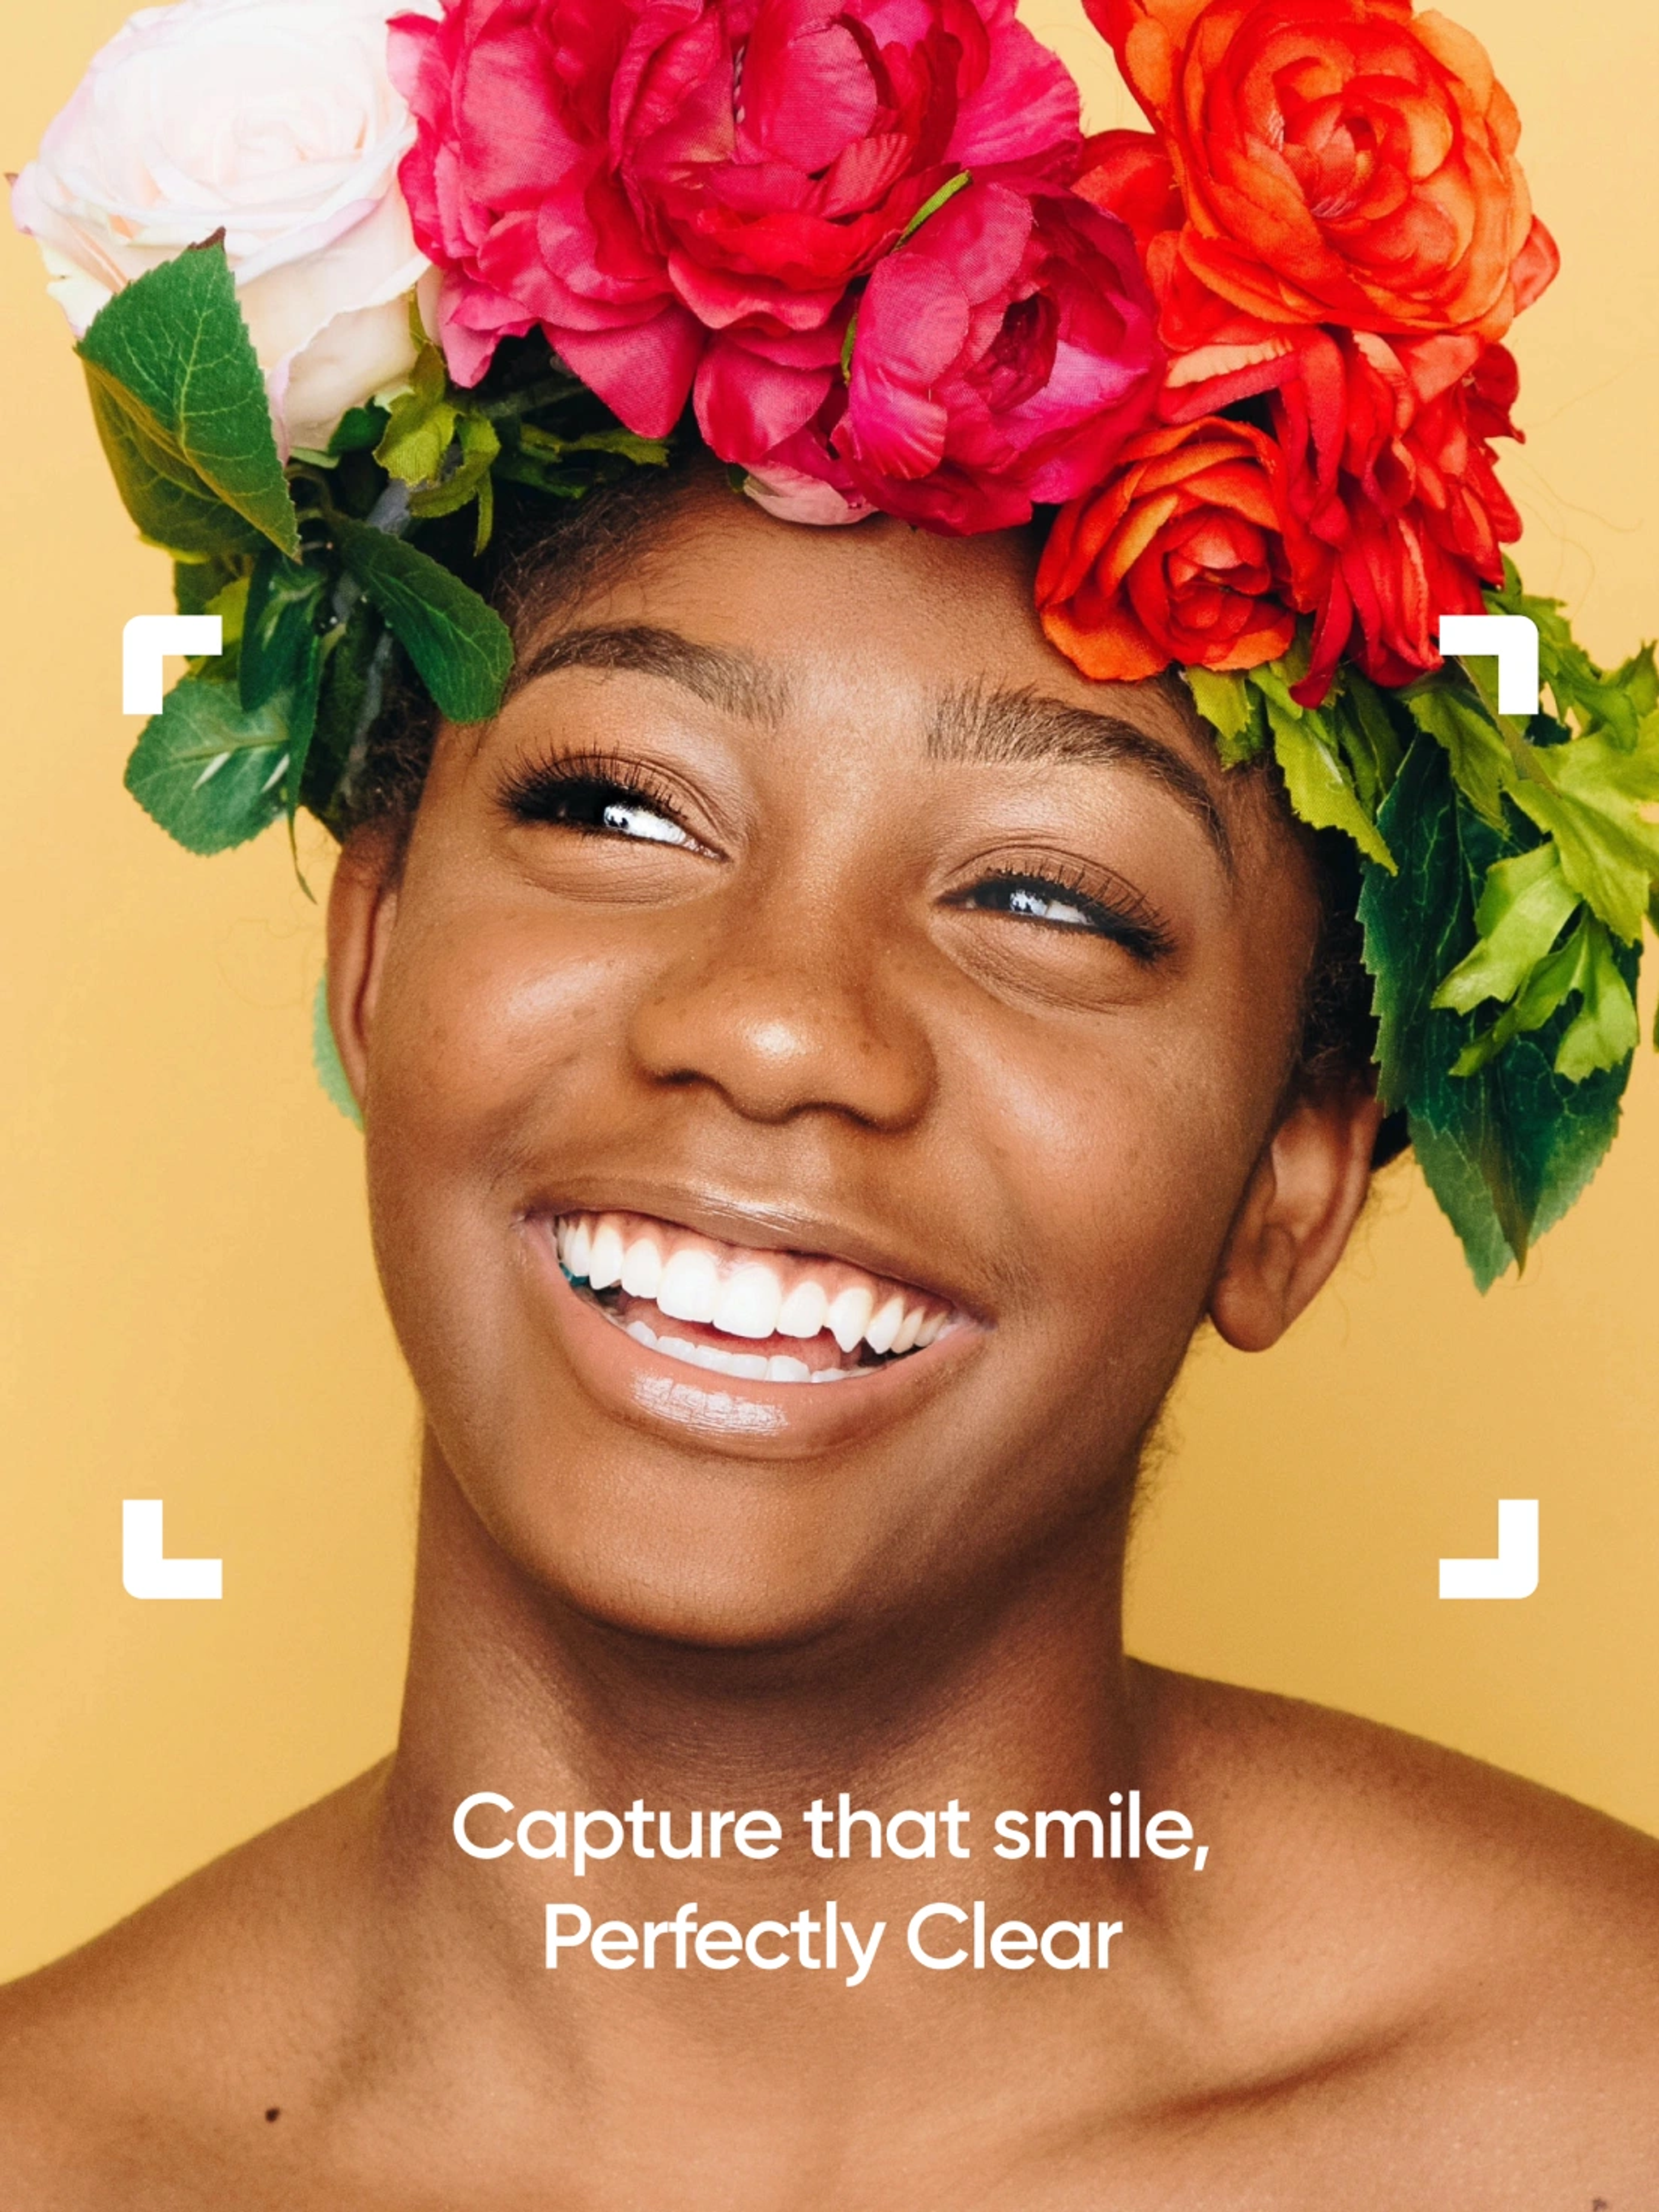 Perfectly Clear poster "Capture that smile"